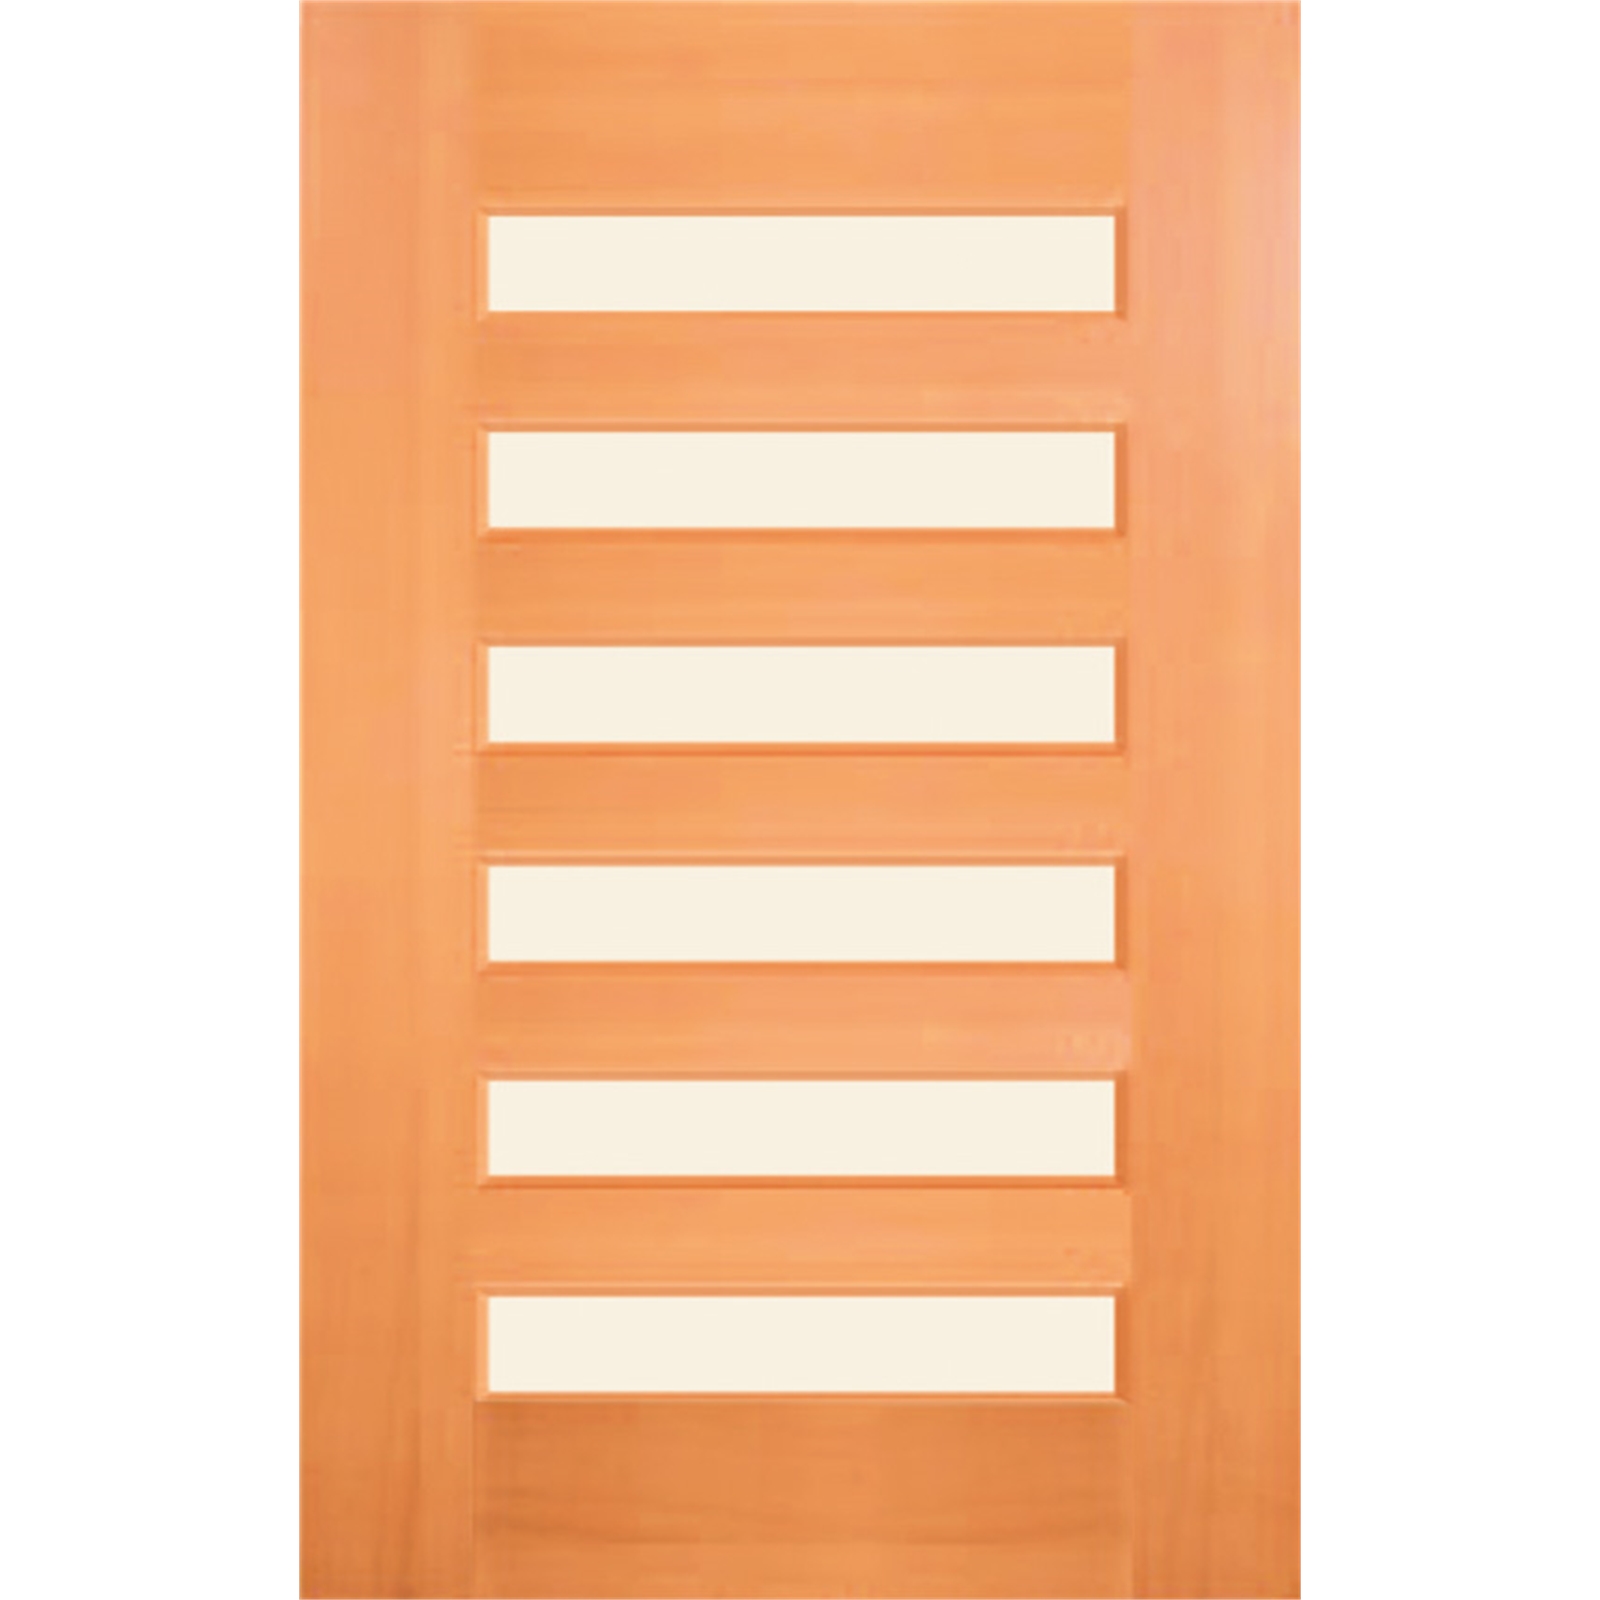 Woodcraft Doors 2040 x 1200 x 40mm Clear Safety Glass St Clair Entrance Door